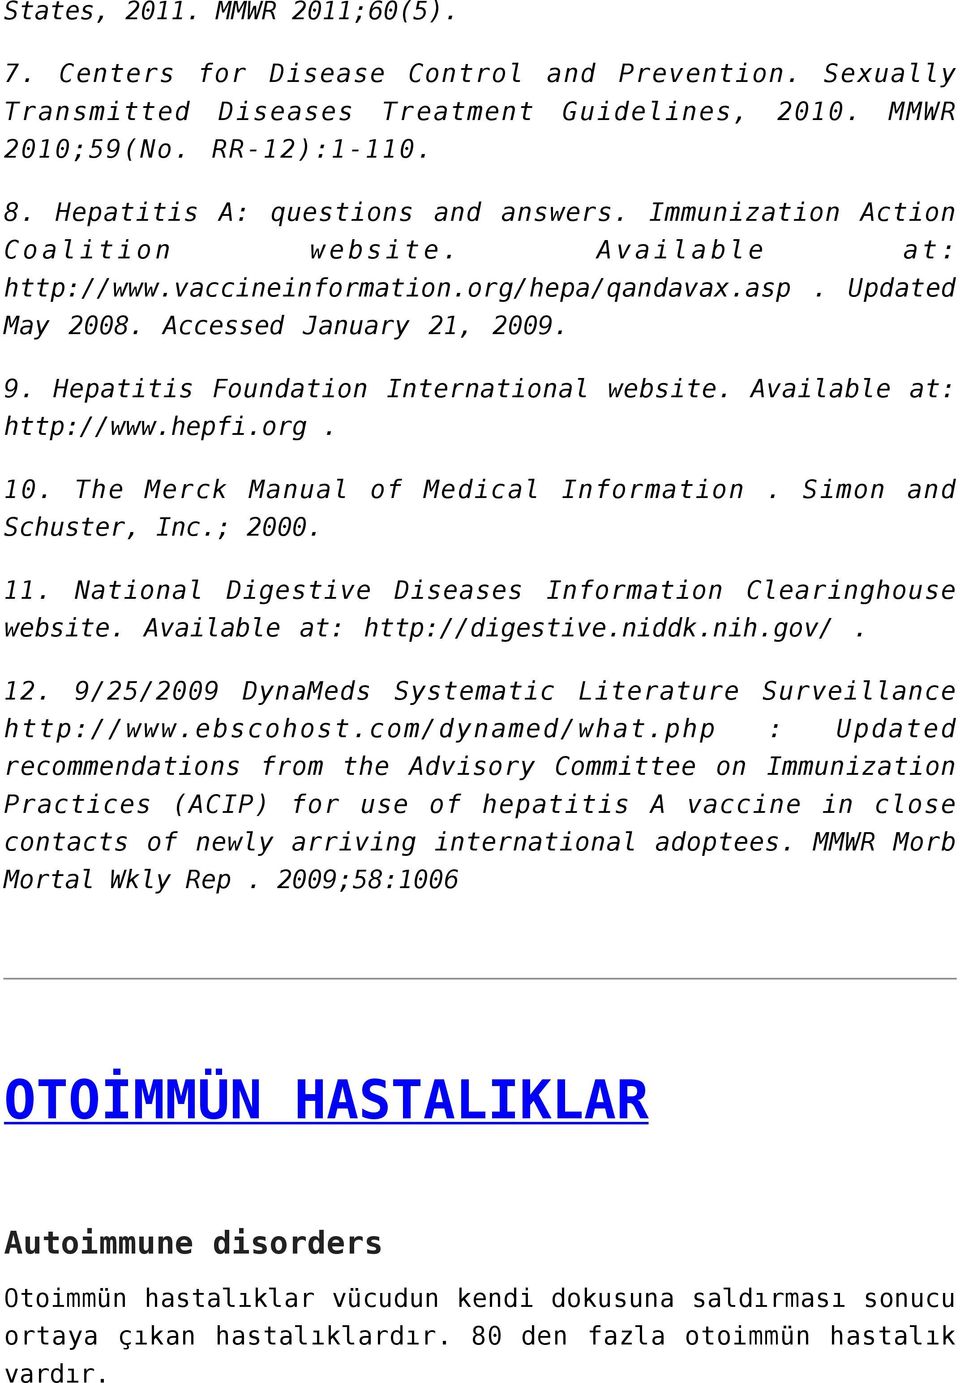 Hepatitis Foundation International website. Available at: http://www.hepfi.org. 10. The Merck Manual of Medical Information. Simon and Schuster, Inc.; 2000. 11.